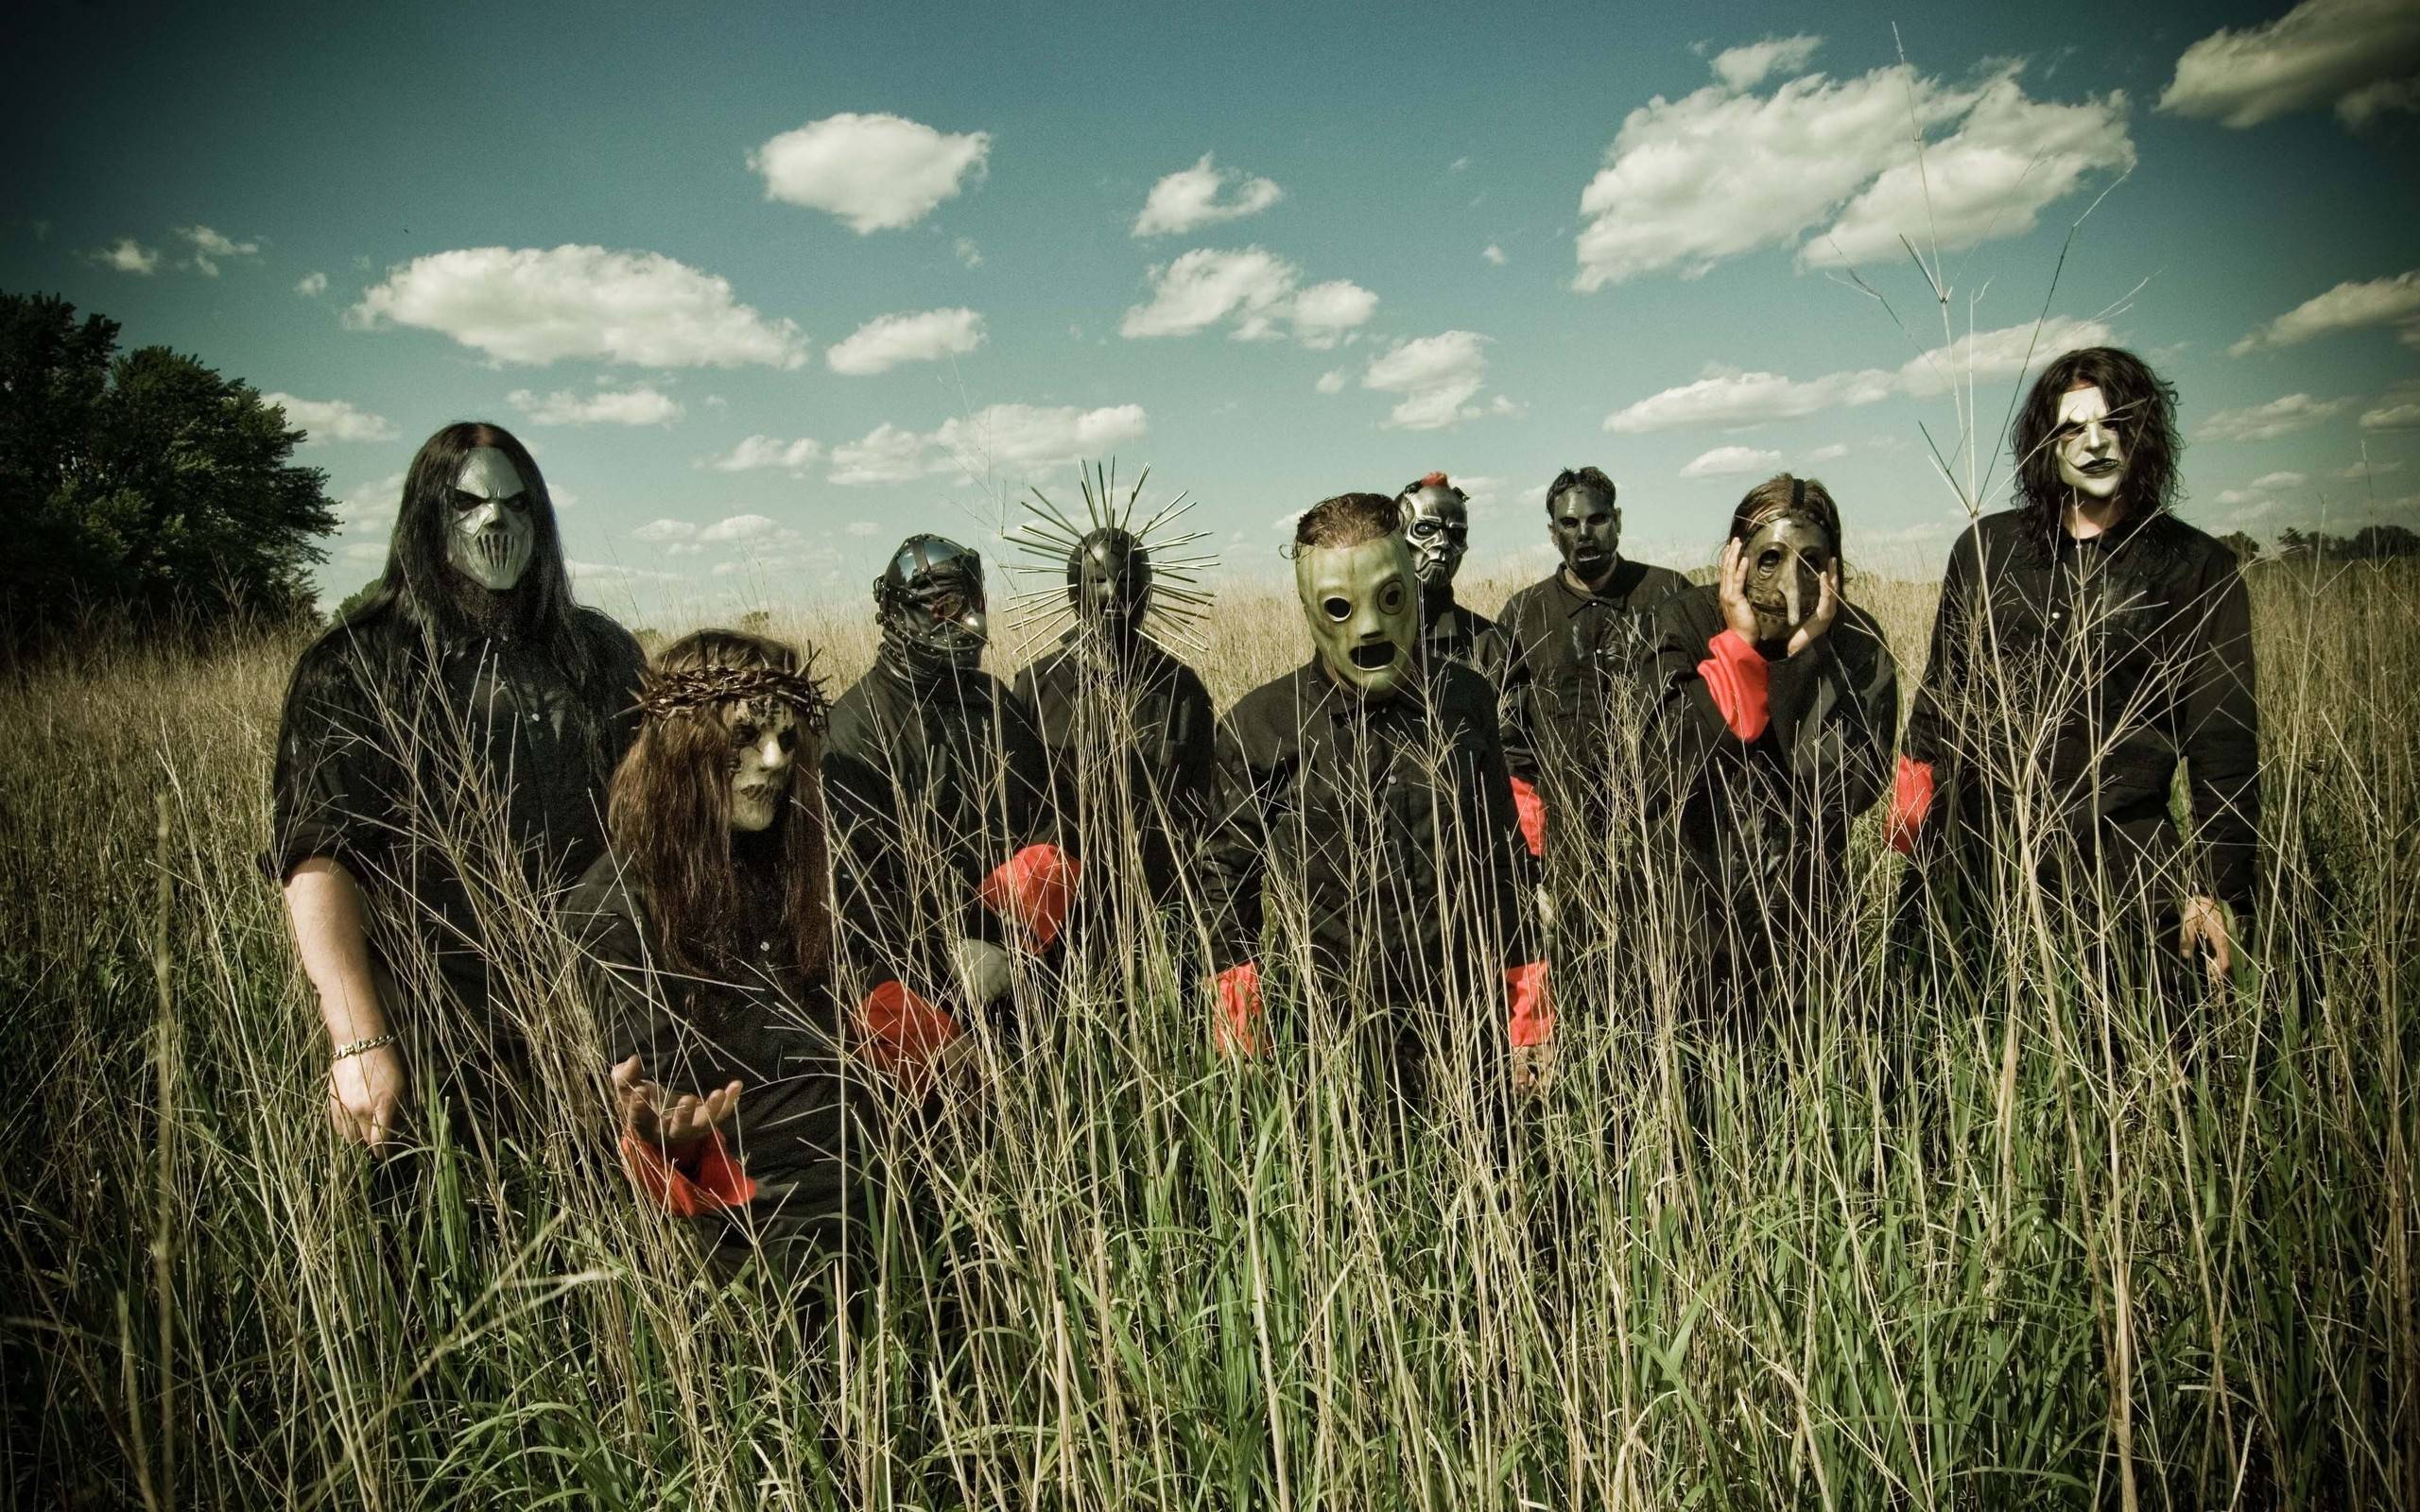 Slipknot Wallpaper And Image Pictures Photos